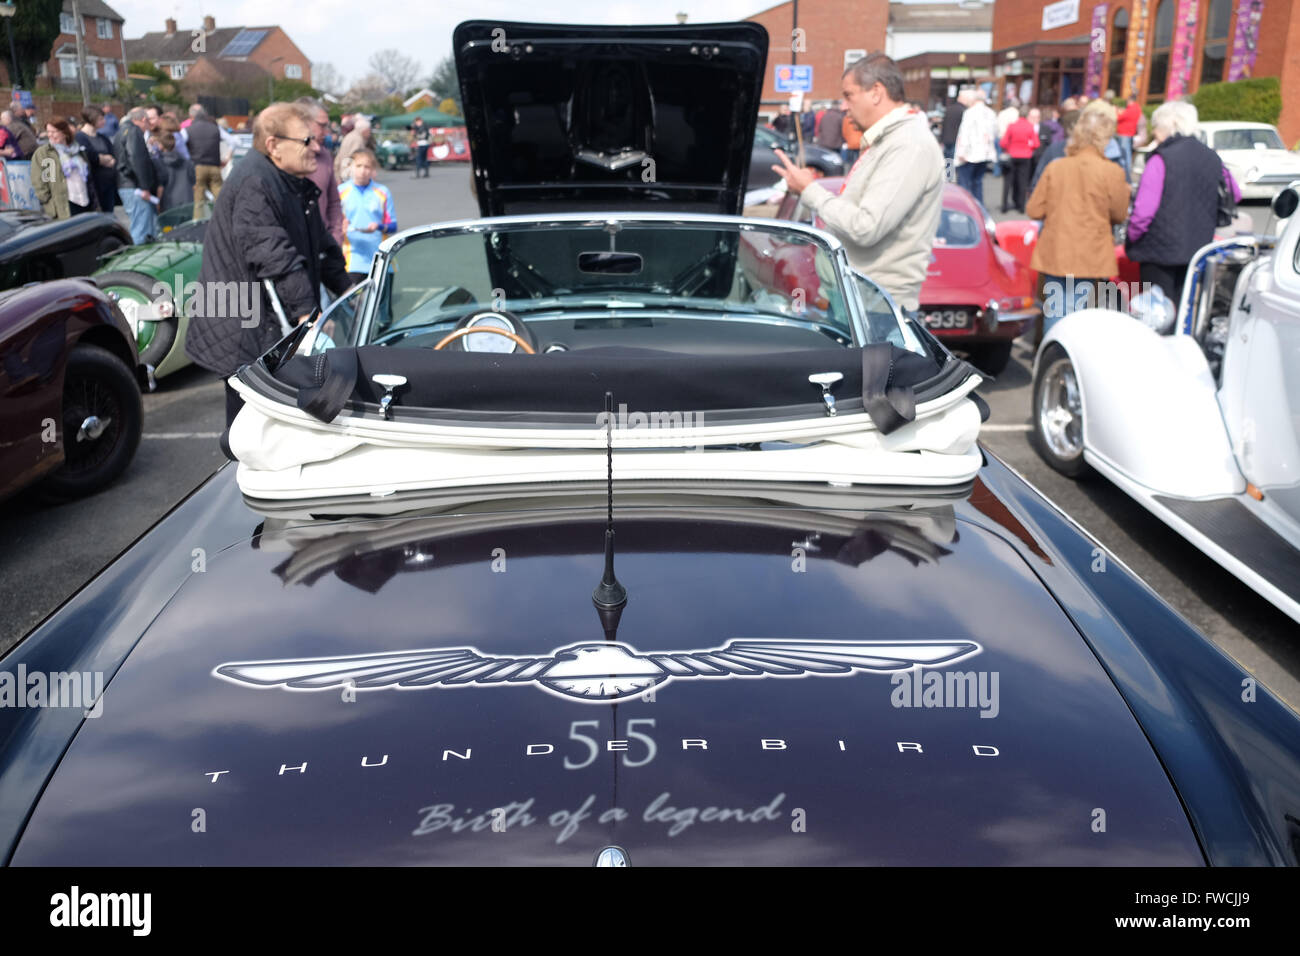 Bromyard, Herefordshire, UK April, 2016 -  the inaugural Speed Festival through the streets of Bromyard the birthplace of the Morgan Motoring Company. Shown here is a 1955 Ford Thunderbird classic car. Stock Photo